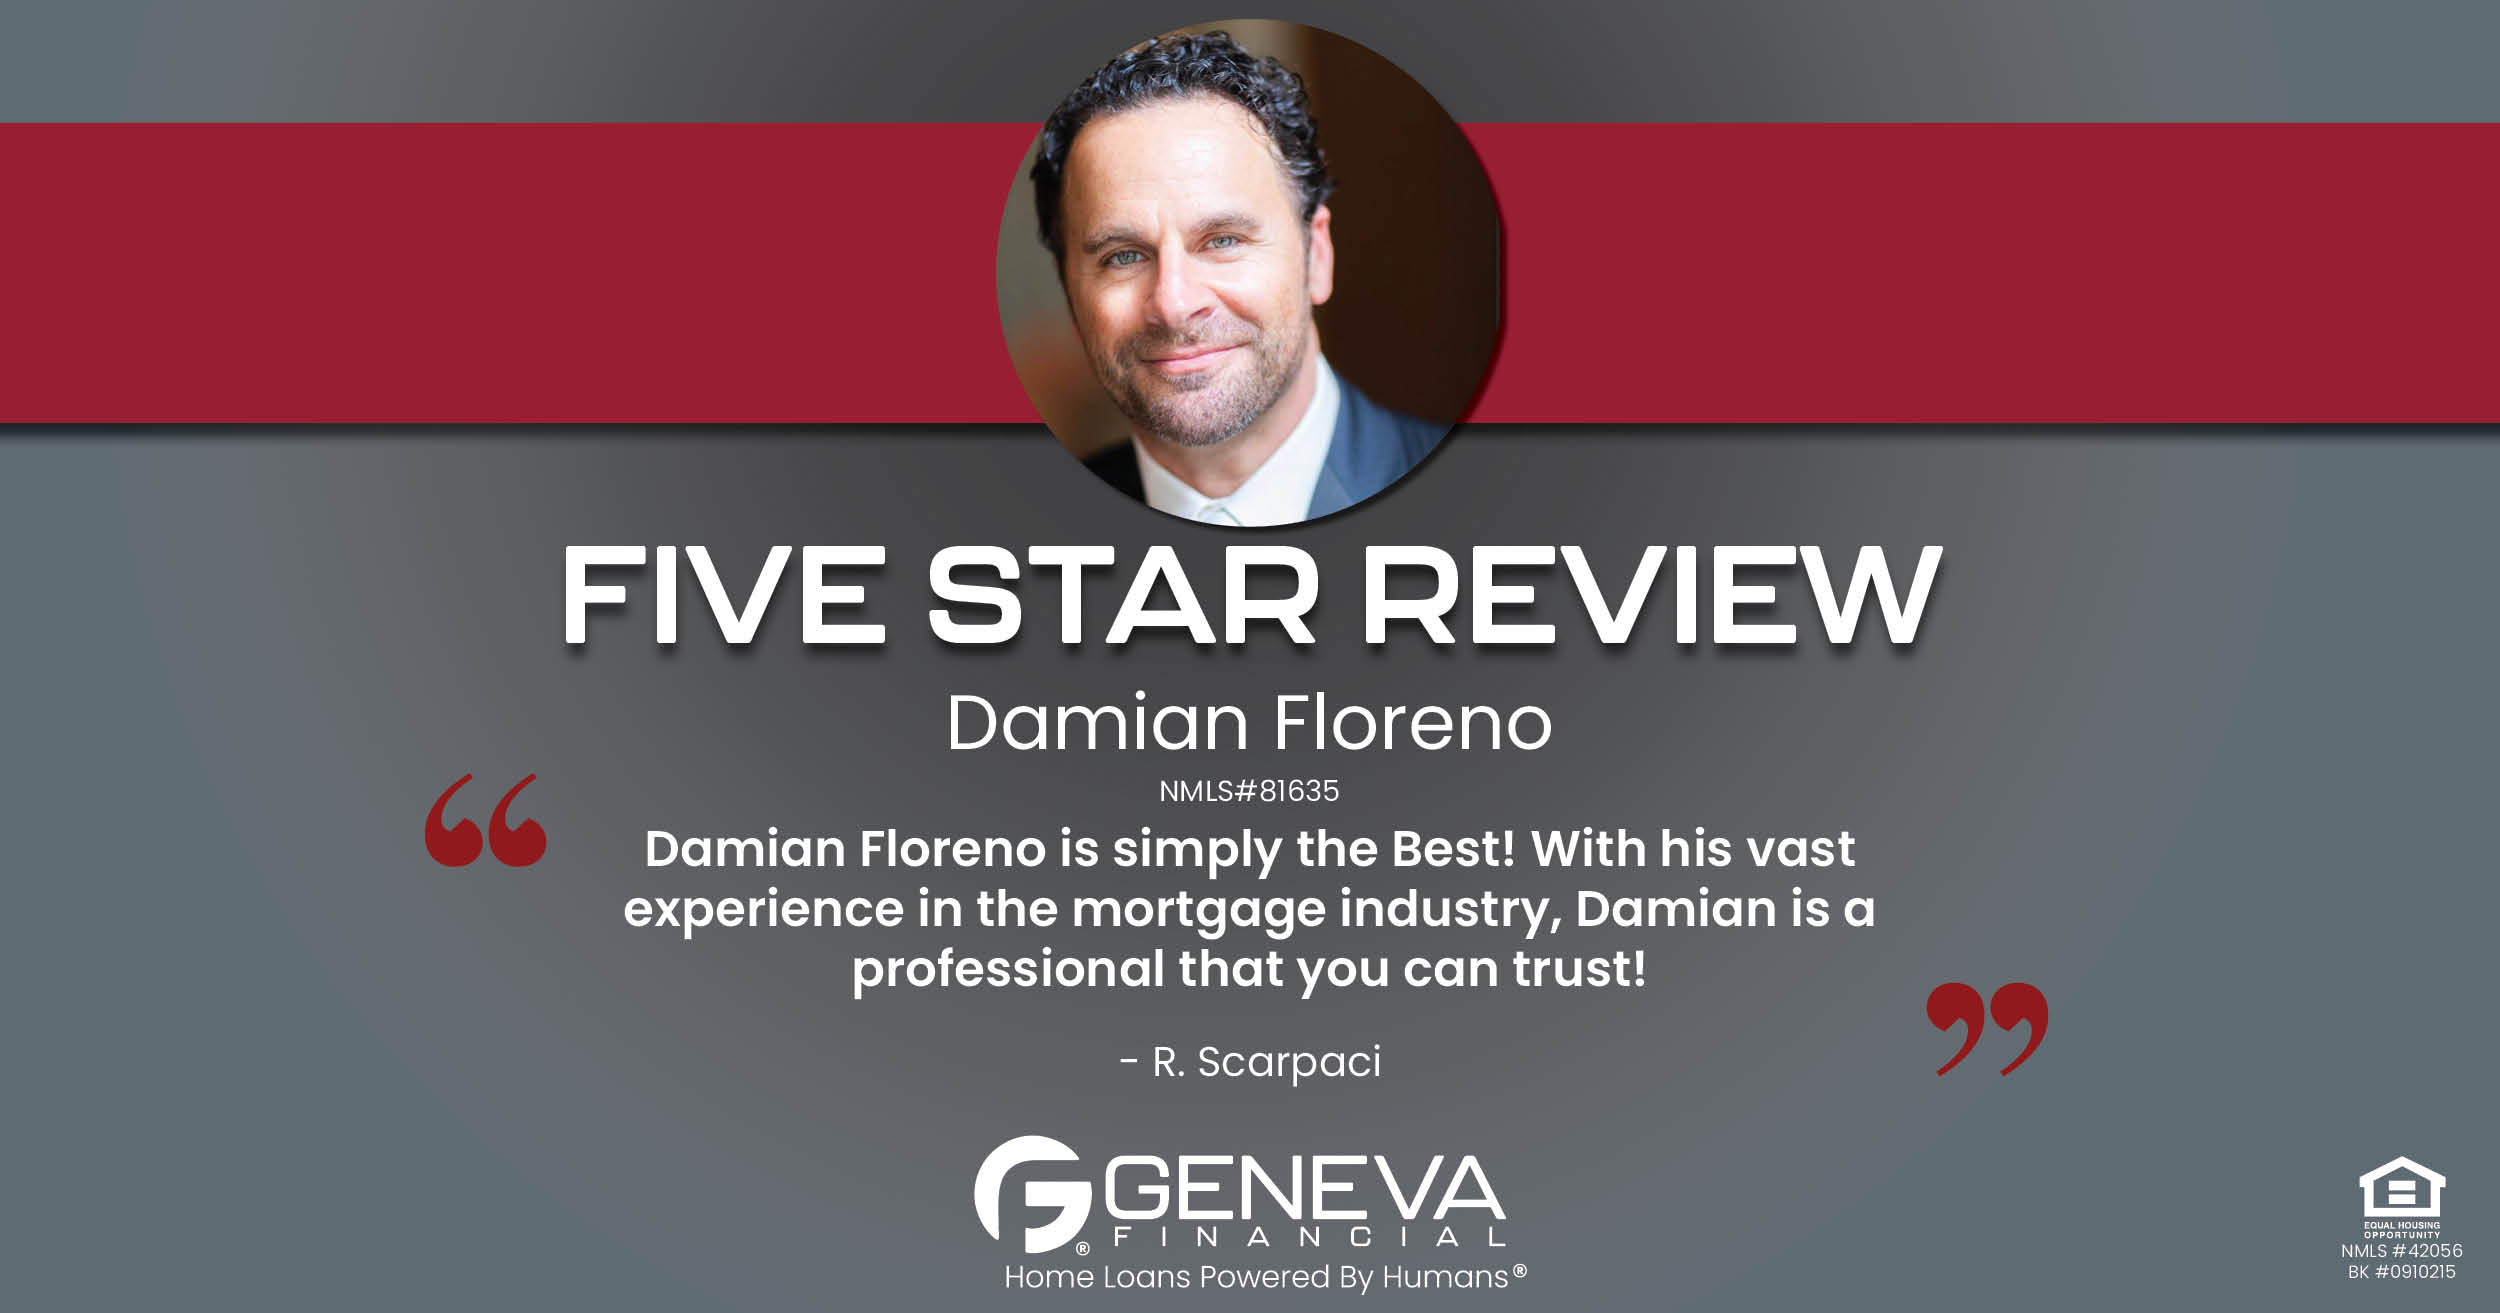 5 Star Review for Damian Floreno, Licensed Mortgage Loan Officer with Geneva Financial, Tacoma, WA – Home Loans Powered by Humans®.